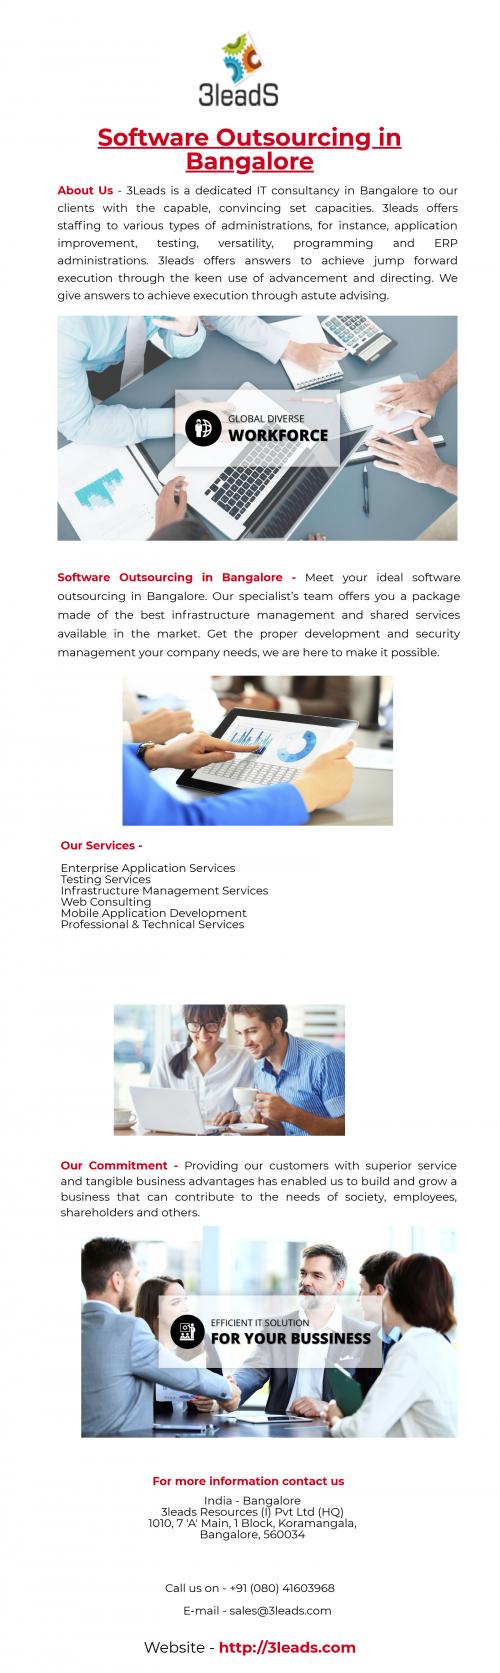 Get the best software outsourcing in Bangalore only with us at 3Leads. We offer a team of people that focus on design, applications, technology platforms, cost and productivity optimization, IT governance, operations and service management, customer relationship and human capital, data, and infrastructure. Visit us to know more about our services.
https://3leads.com/services.html